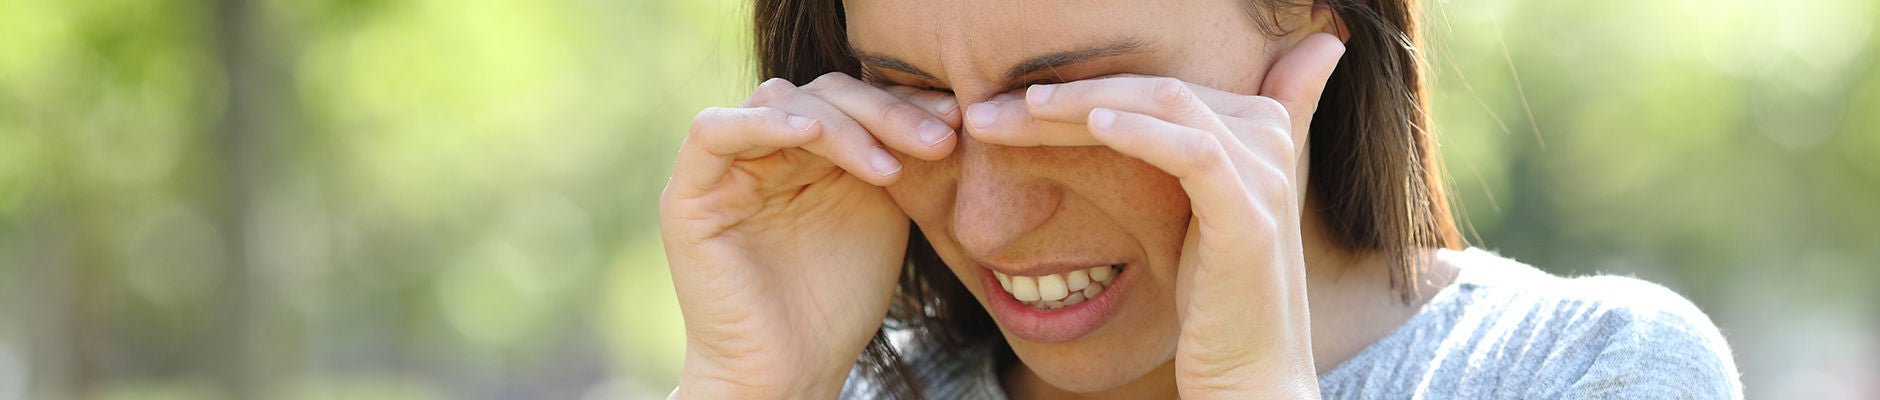 Disgusted woman rubbing her eyes standing outdoors in a park